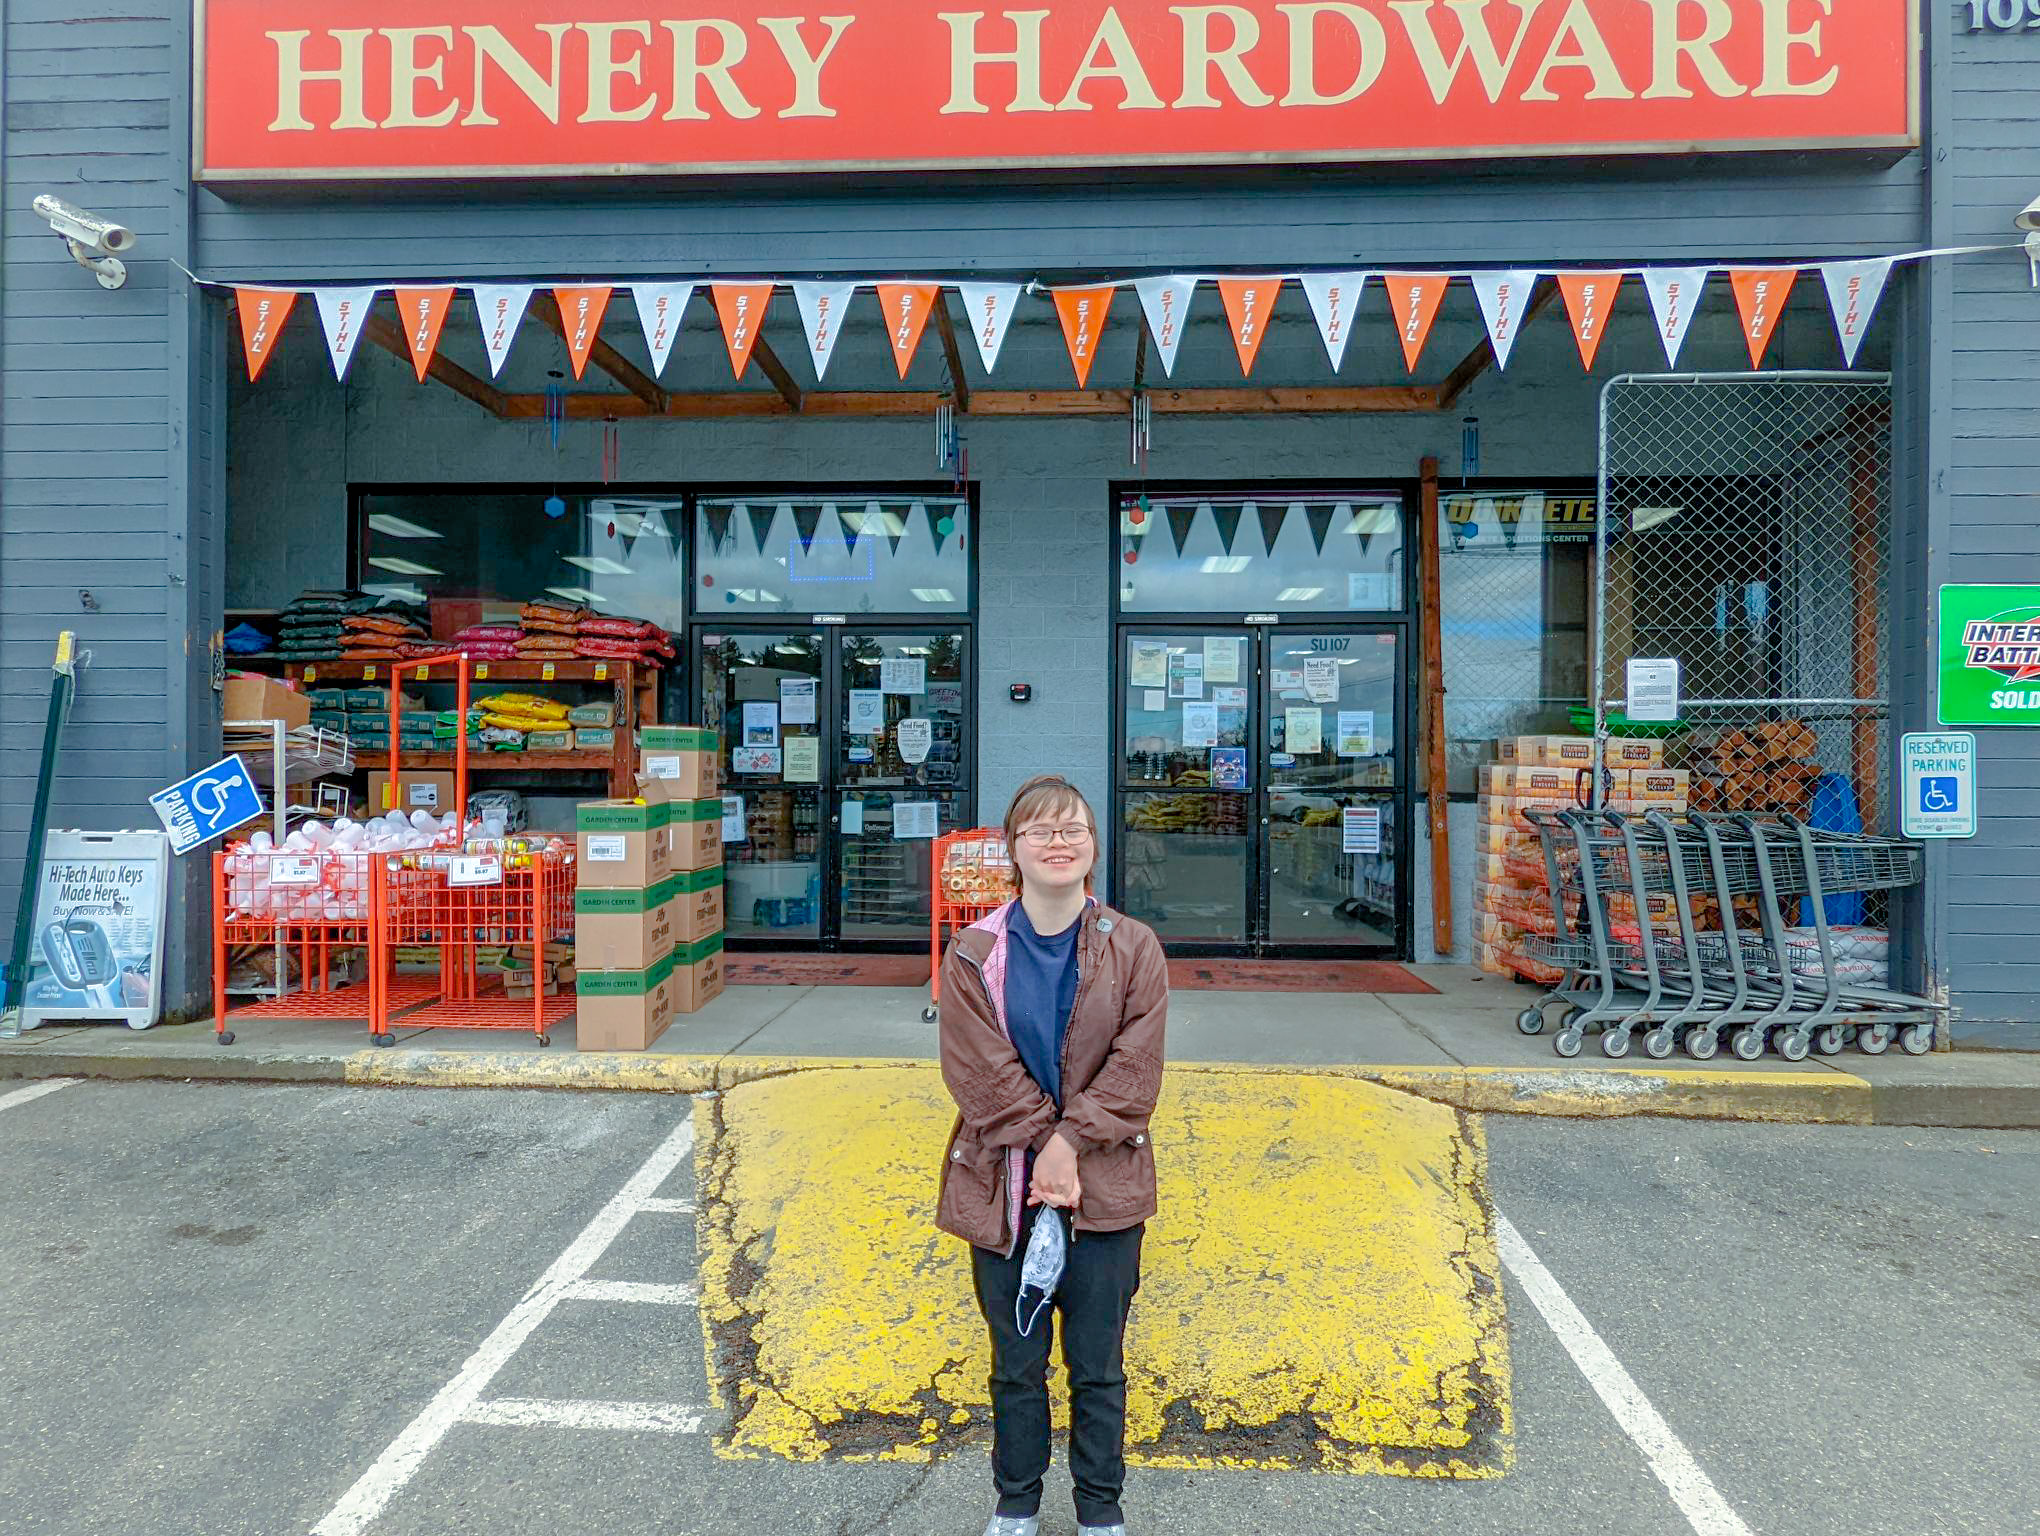 Image: Woman with brown coat and mask in her hand smiles in front of Henery Hardware store.